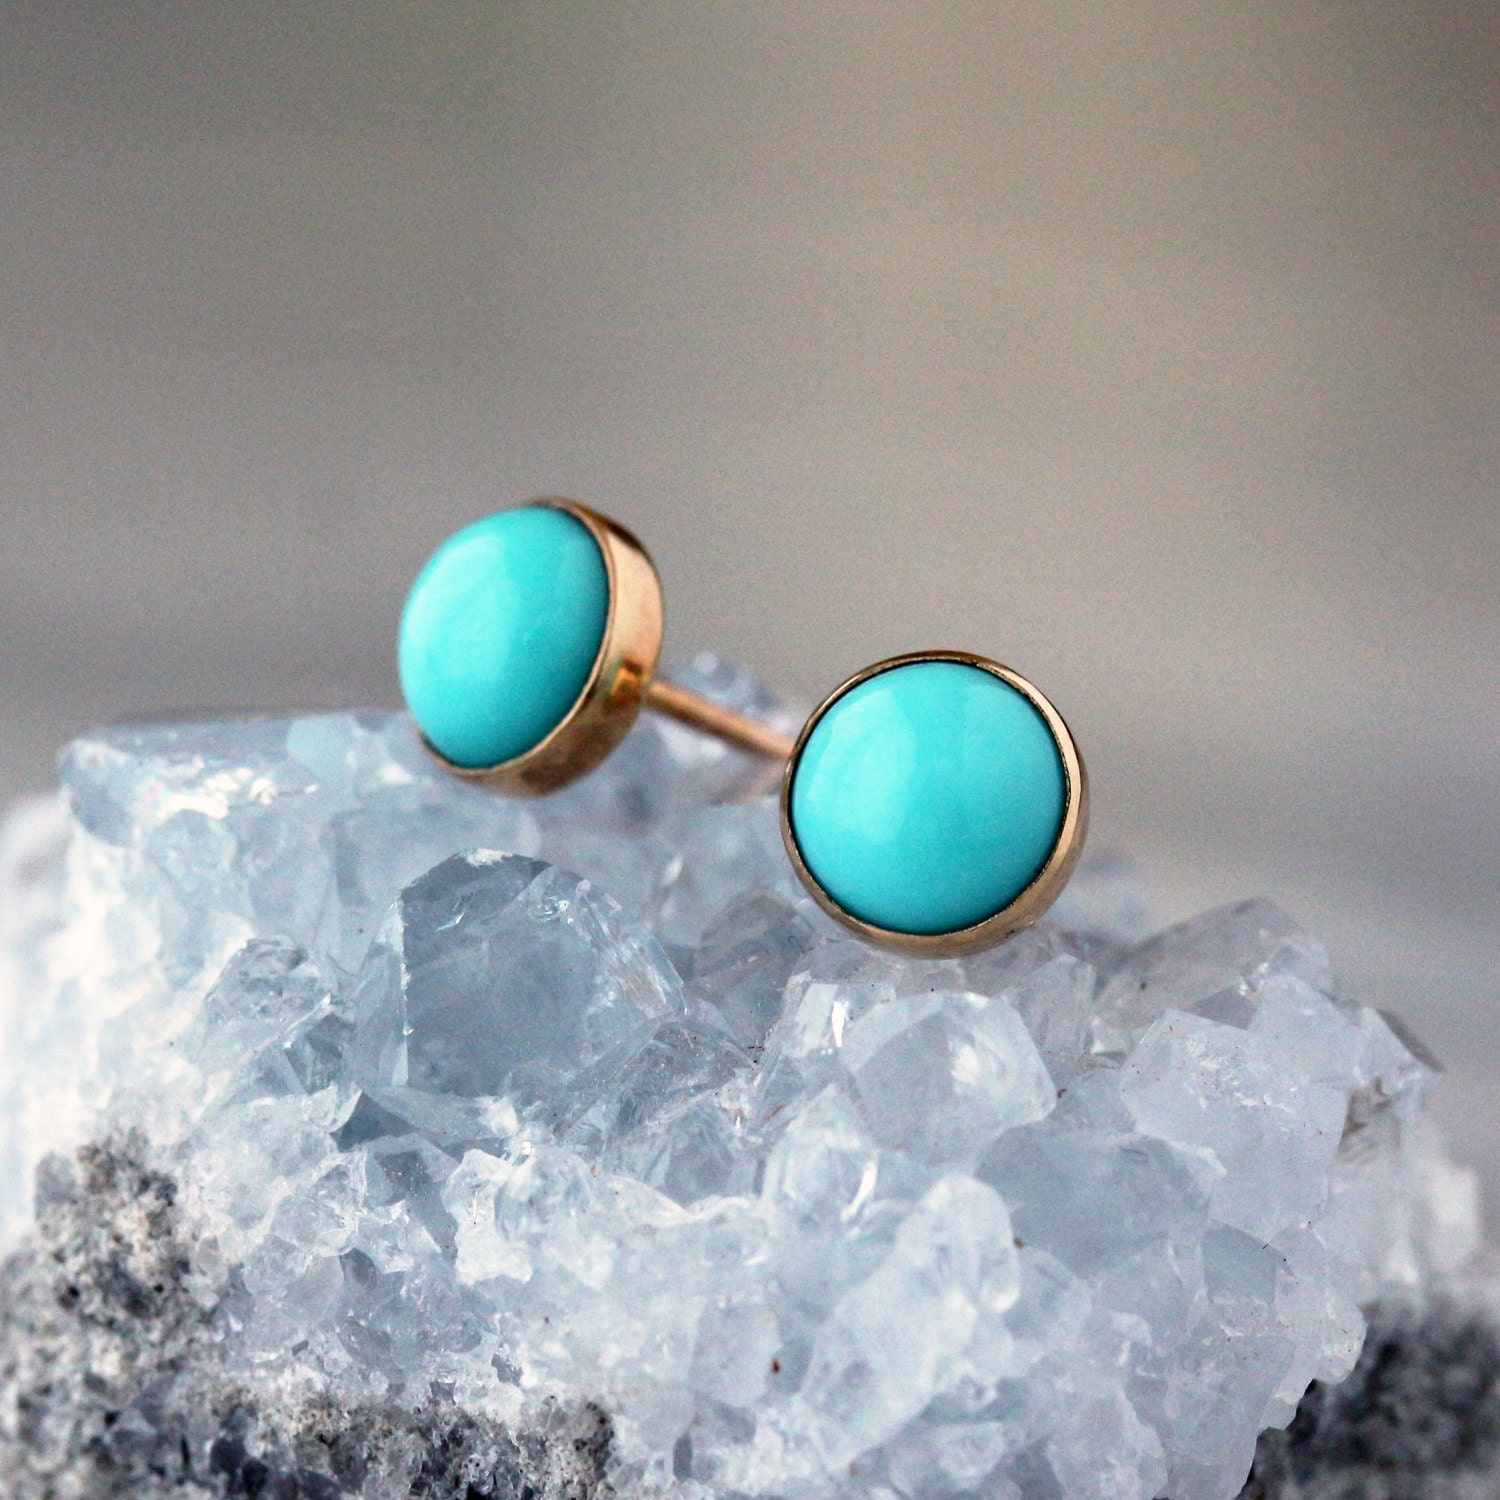 Turquoise And Gold Stud Earrings K Yellow Gold Post